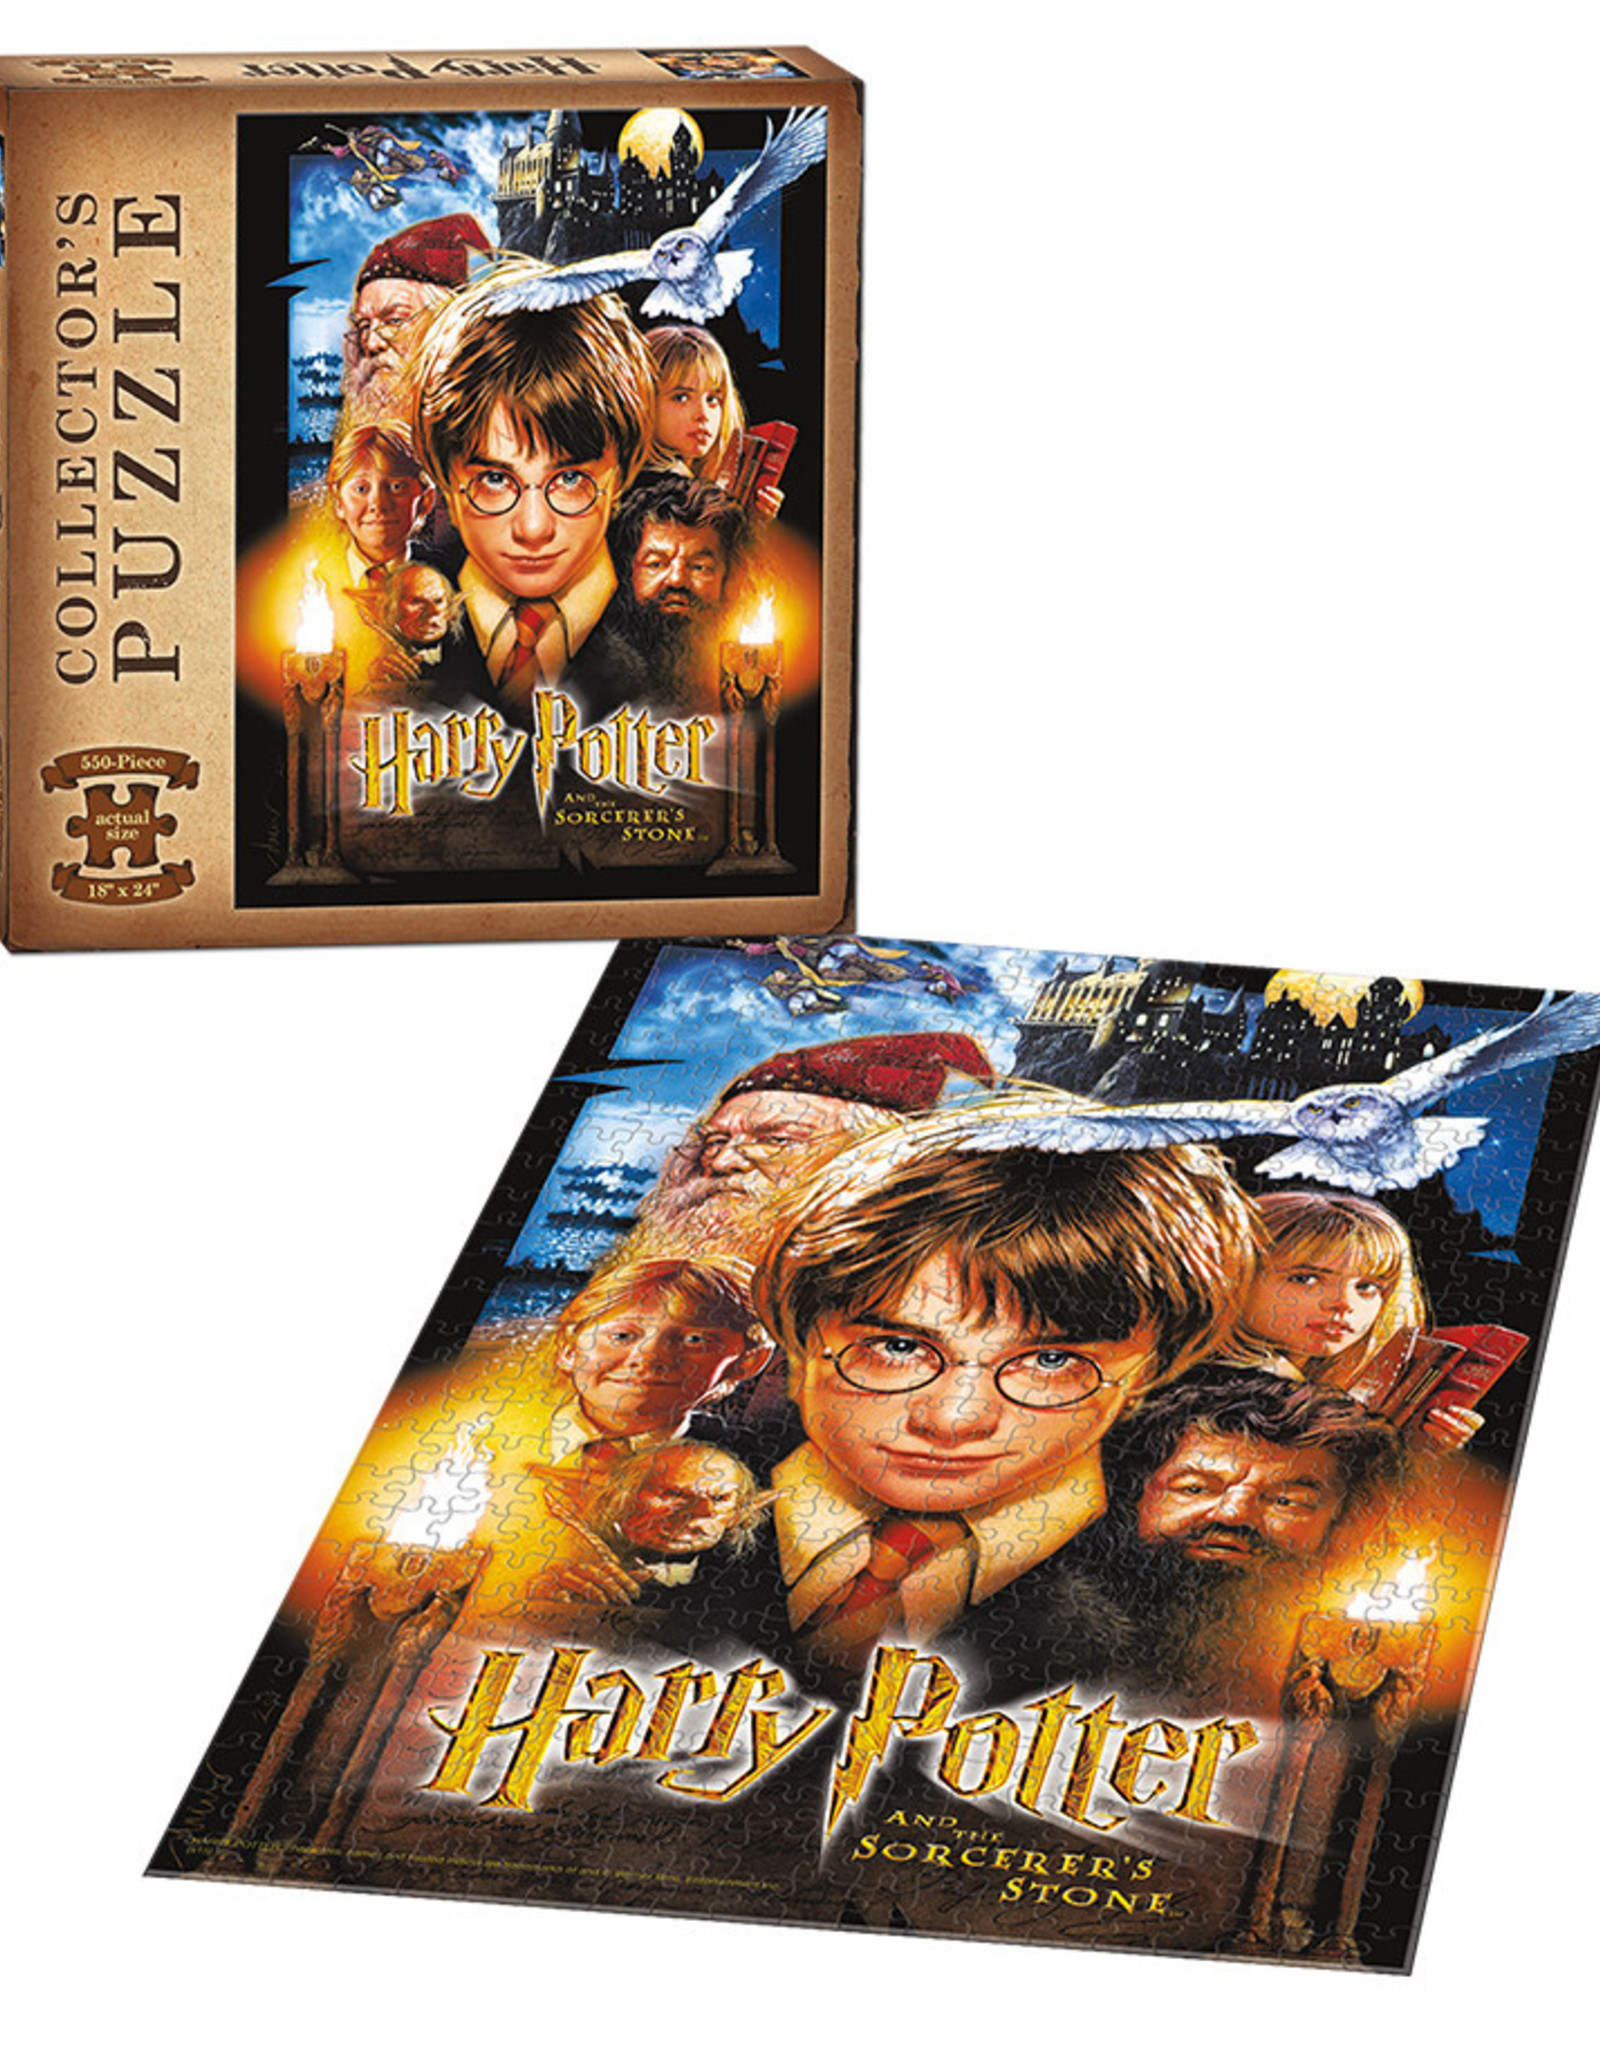 USAopoly Harry Potter and the Sorcerer’s Stone 550 PC